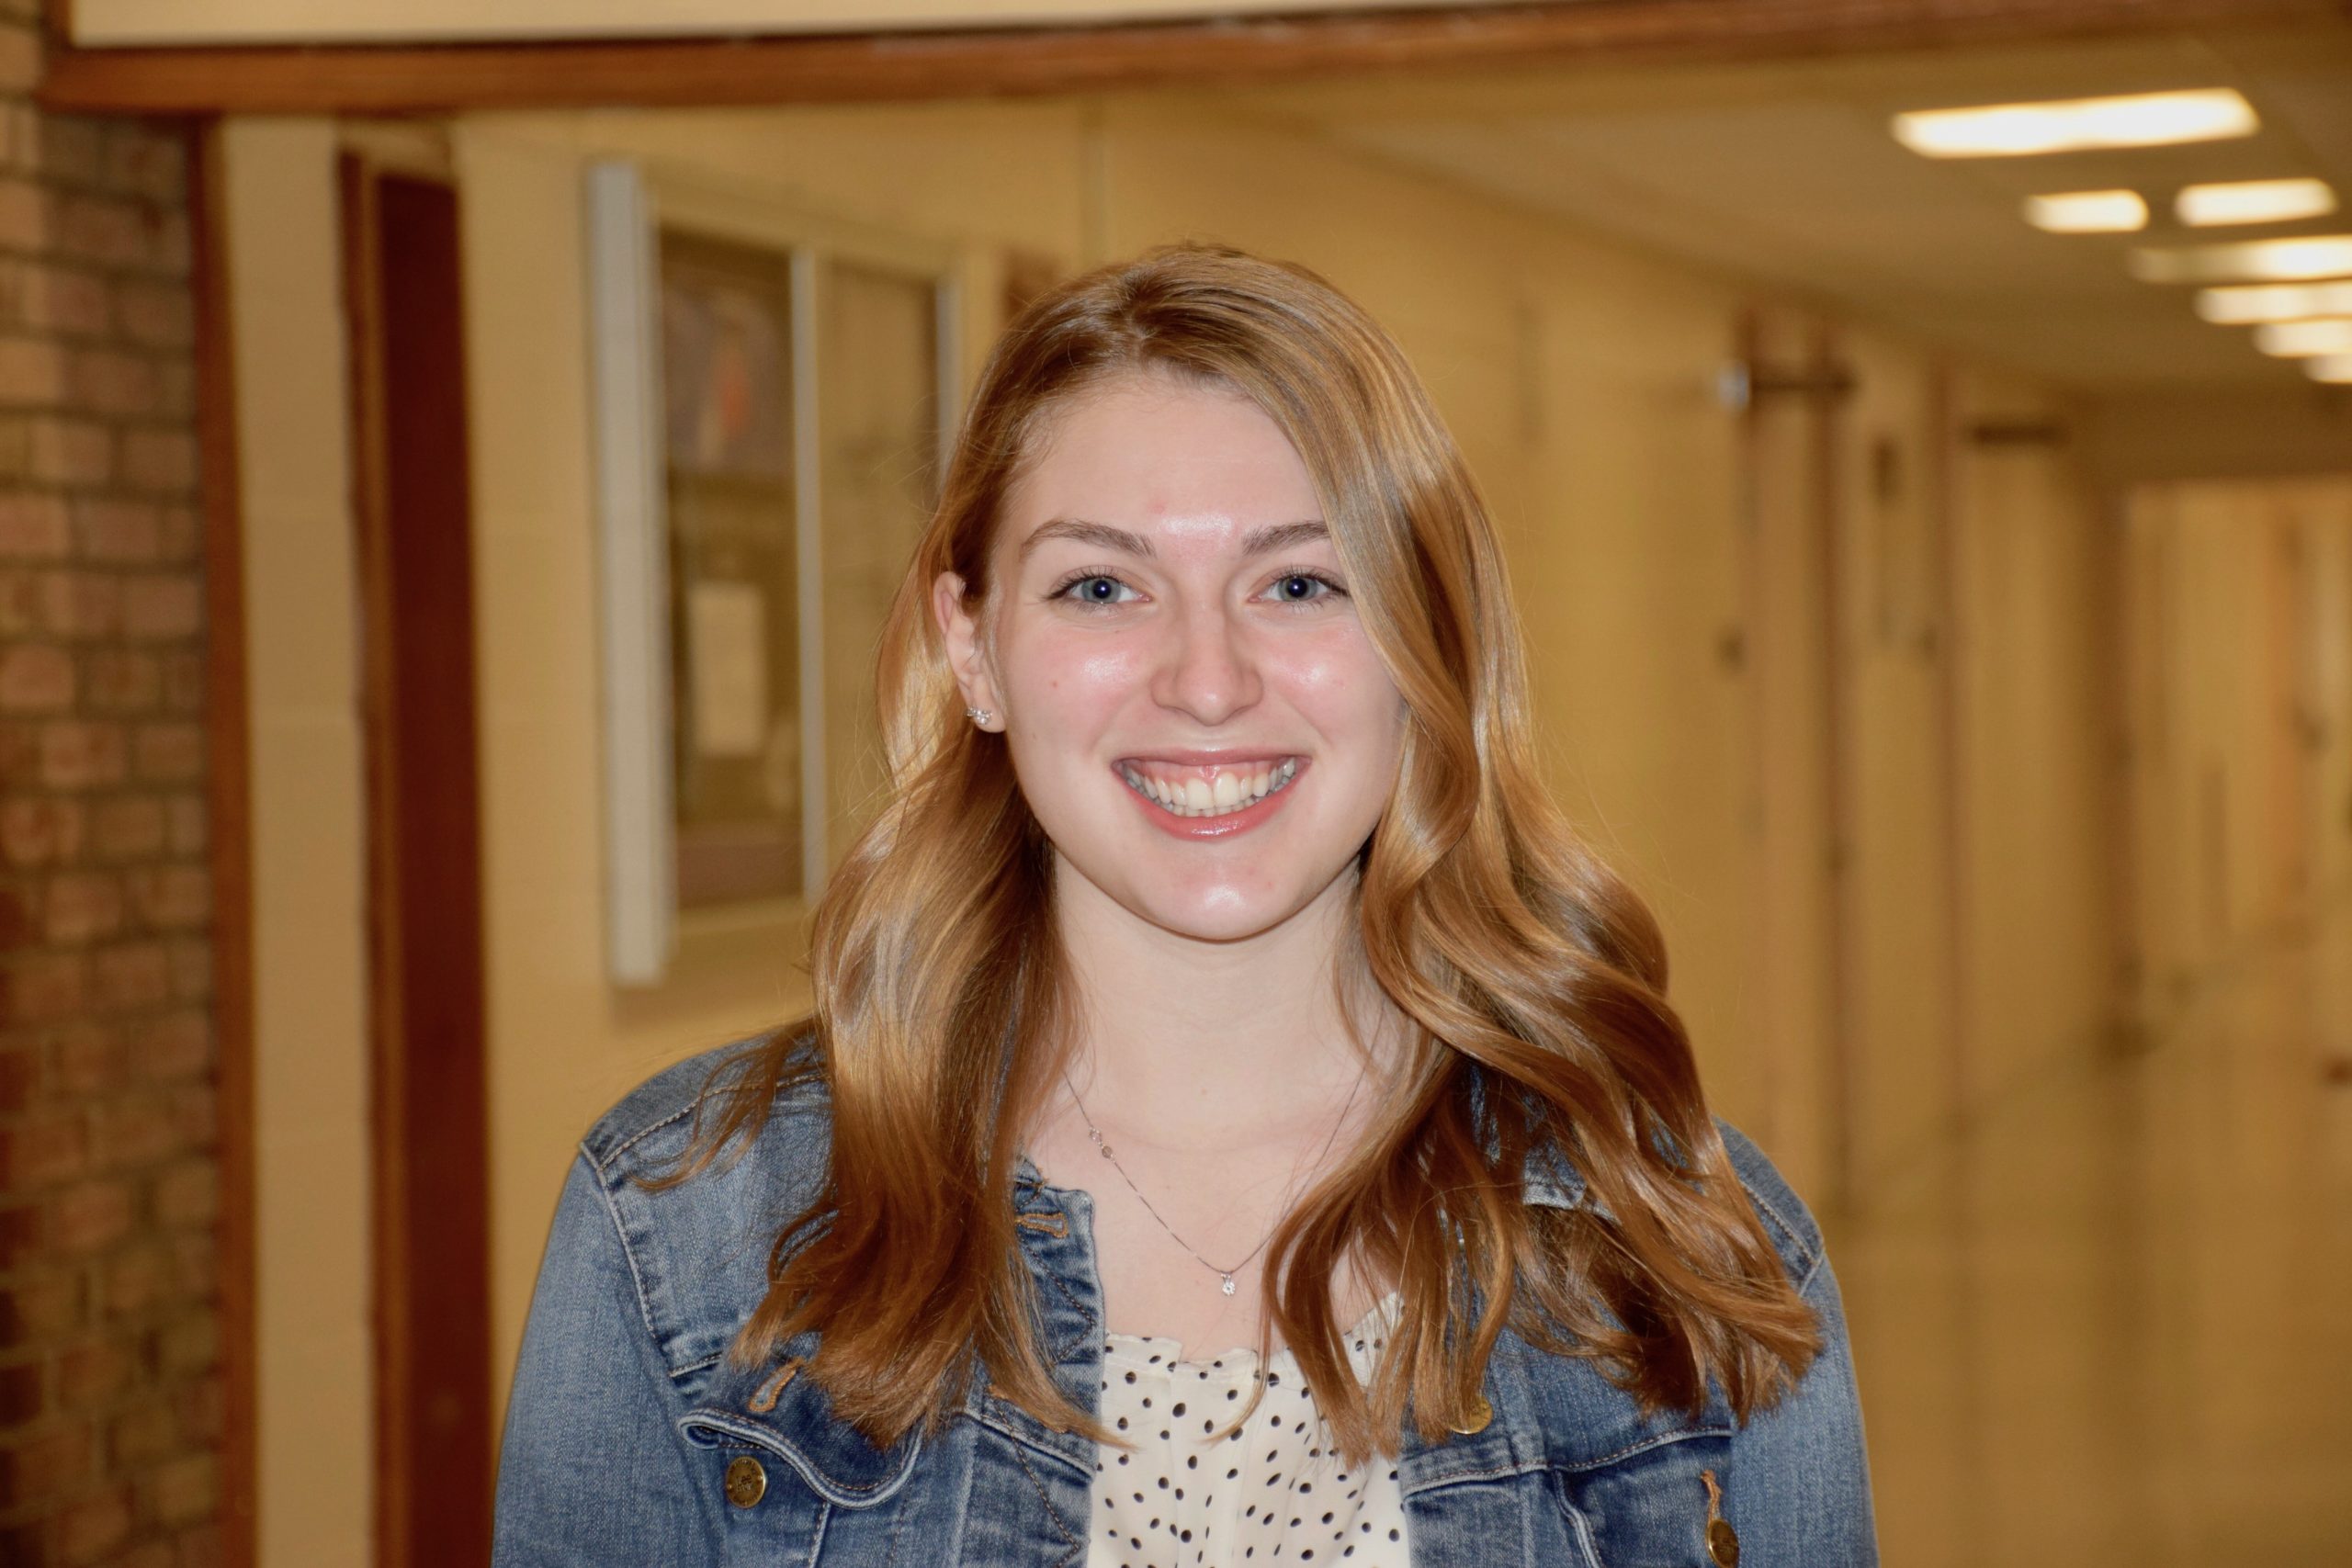 Hampton Bays High School senior Julia Heming earned third place in the New York State VFW Voice of Democracy essay contest for her entry, “What Makes America Great.” In her essay, she argued that America is great for one single reason, its diversity. The daughter of a U.S. Navy vet, she has ancestors on both parents’ sides who can be traced back to the Mayflower, as well as an ancestor who was an original signer of the Declaration of Independence. She is editor-in-chief of her school’s newspaper, The Tide, has been an intern for The Southampton Press. She is also a member of her school’s Key Club and coaches cheer at Our Lady of the Hamptons Regional Catholic School and plans to study journalism in college.